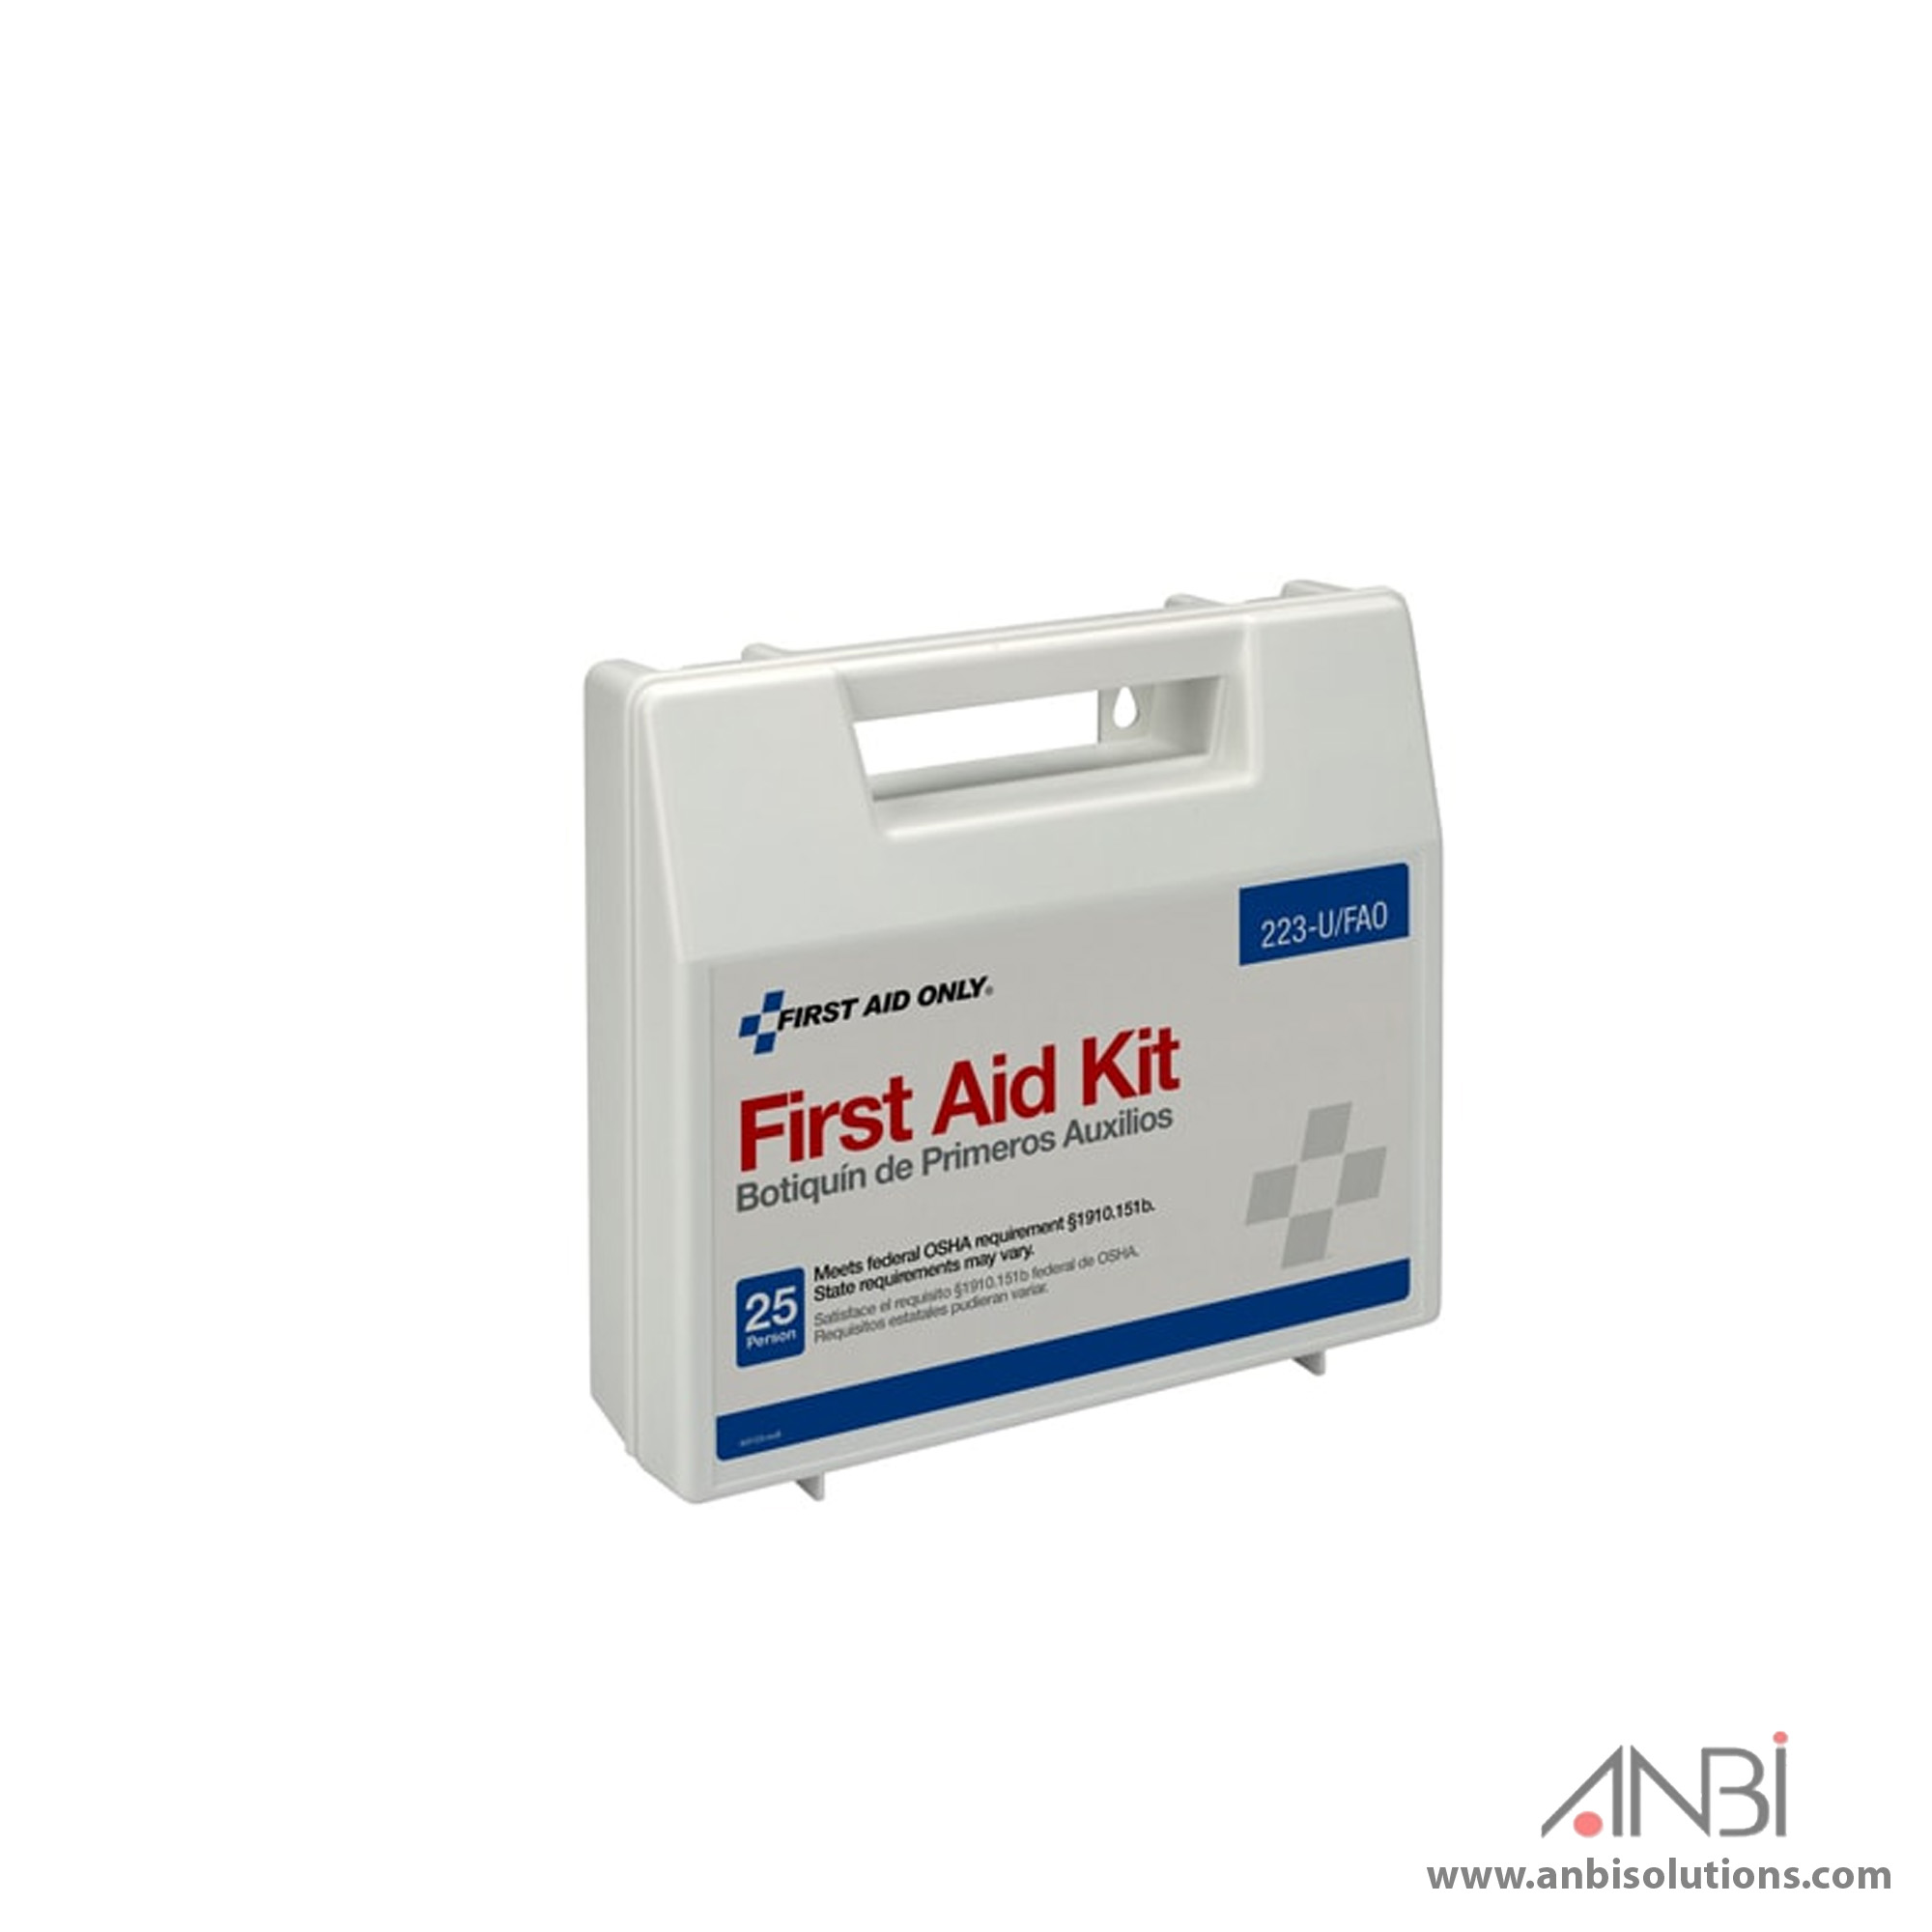 https://anbisolutions.com/wp-content/uploads/2019/12/First-Aid-Kit-25-Person.jpg